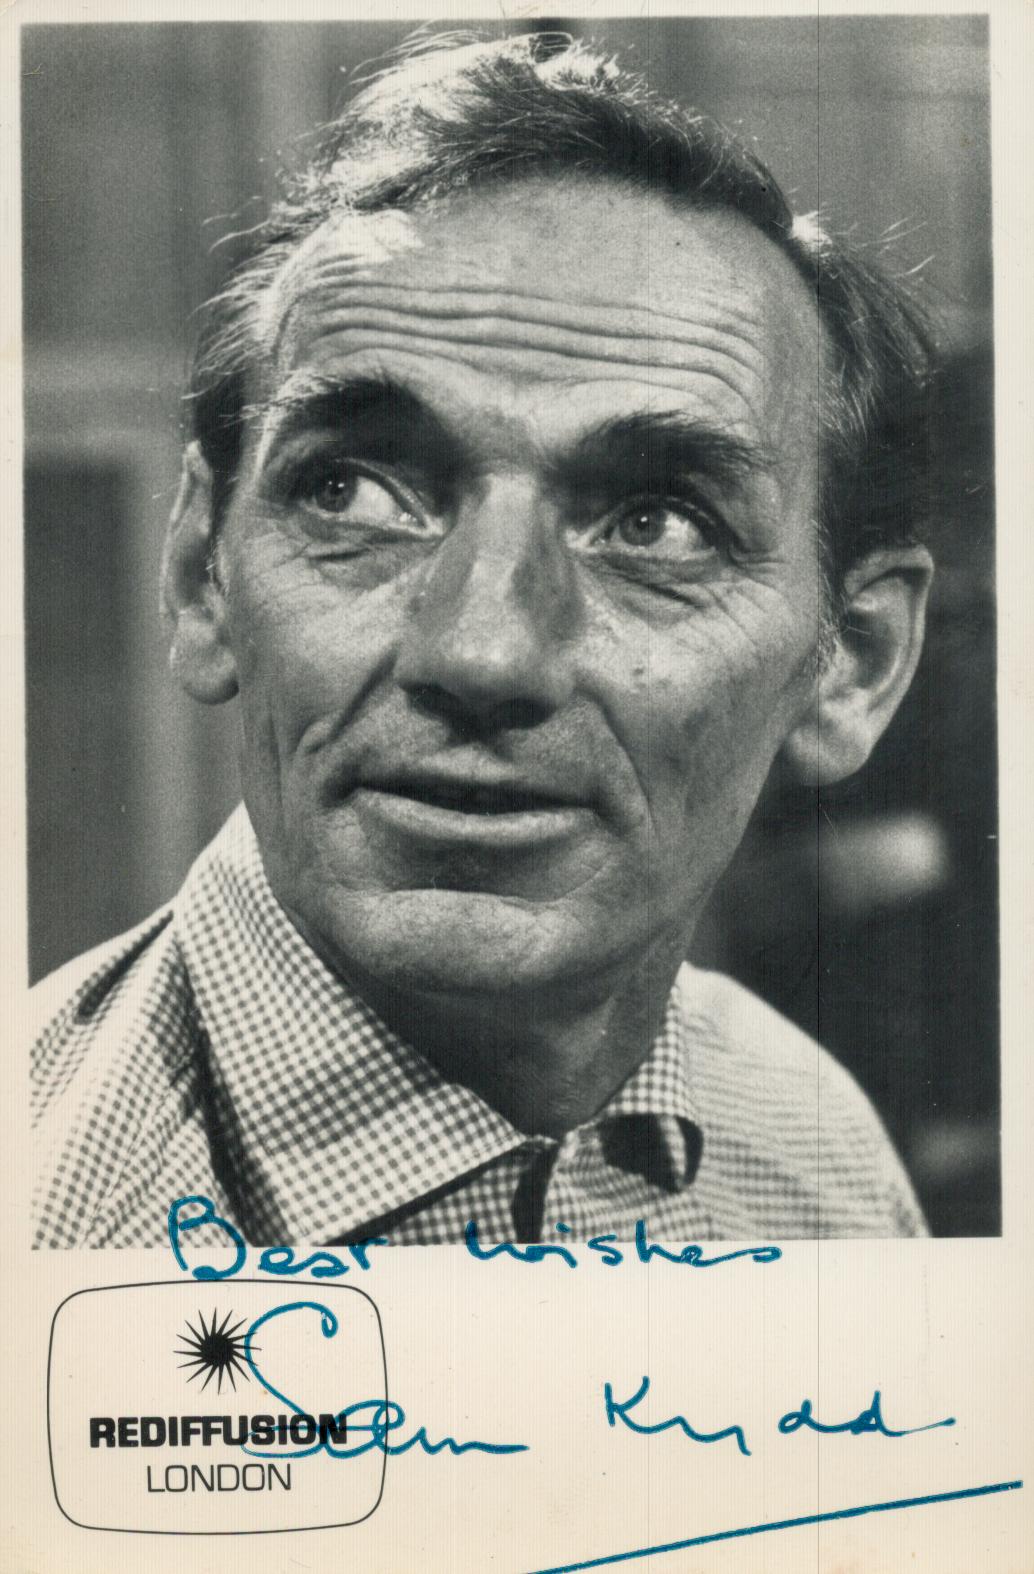 Sam Kydd signed promo black & white photo 5.5x3.5 Inch. Was a British actor. His best-known roles